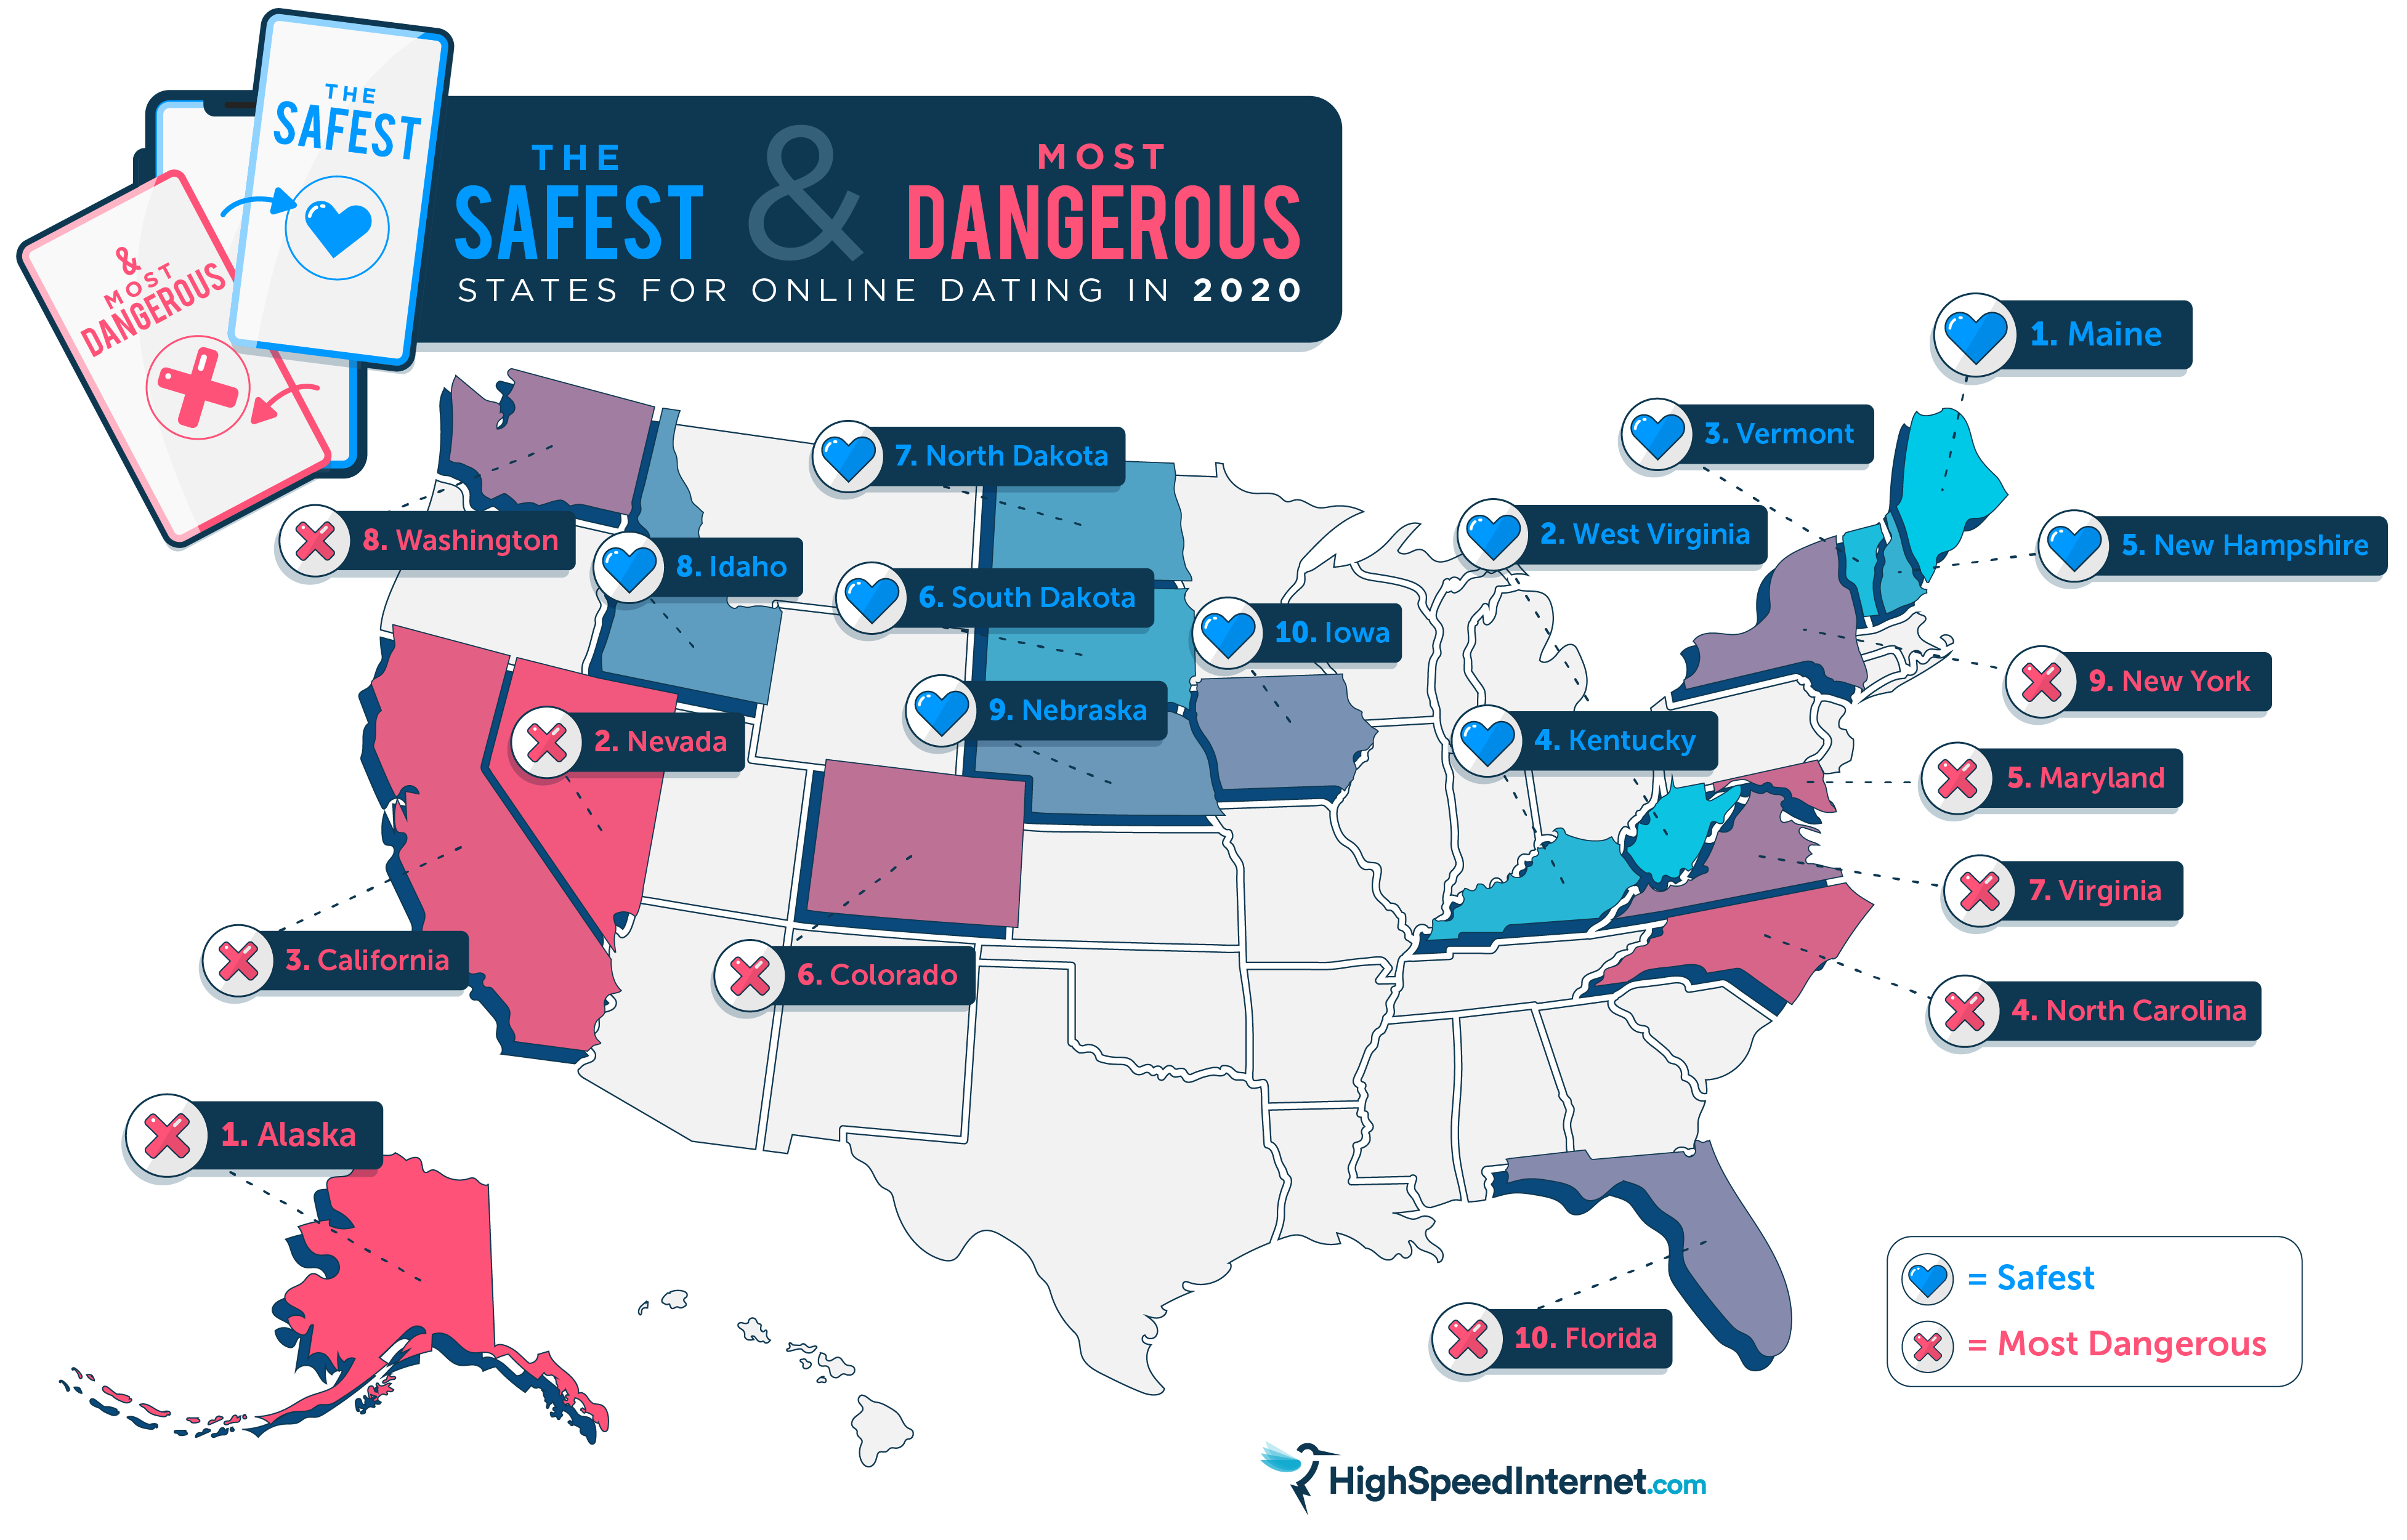 The safest and most dangerous states for online dating in 2020